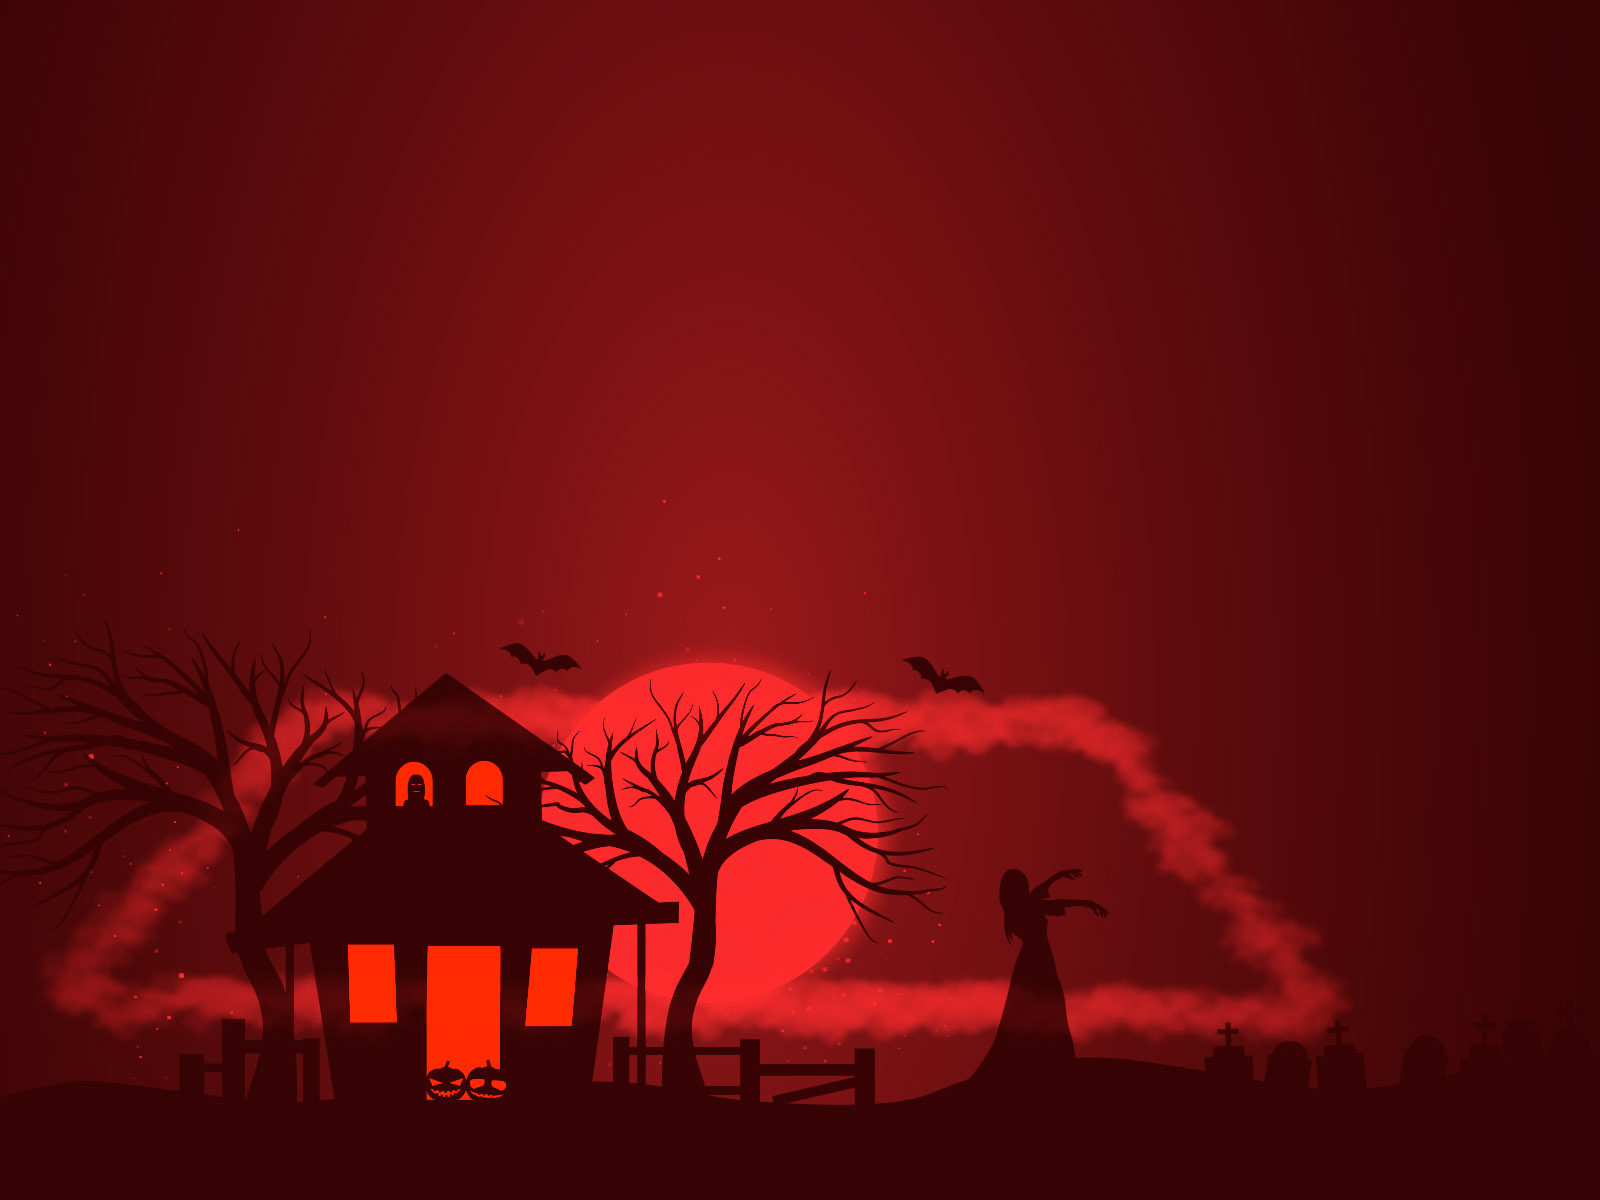 Evil Horror Powerpoint Templates Objects Red Free Ppt Backgrounds And Templates